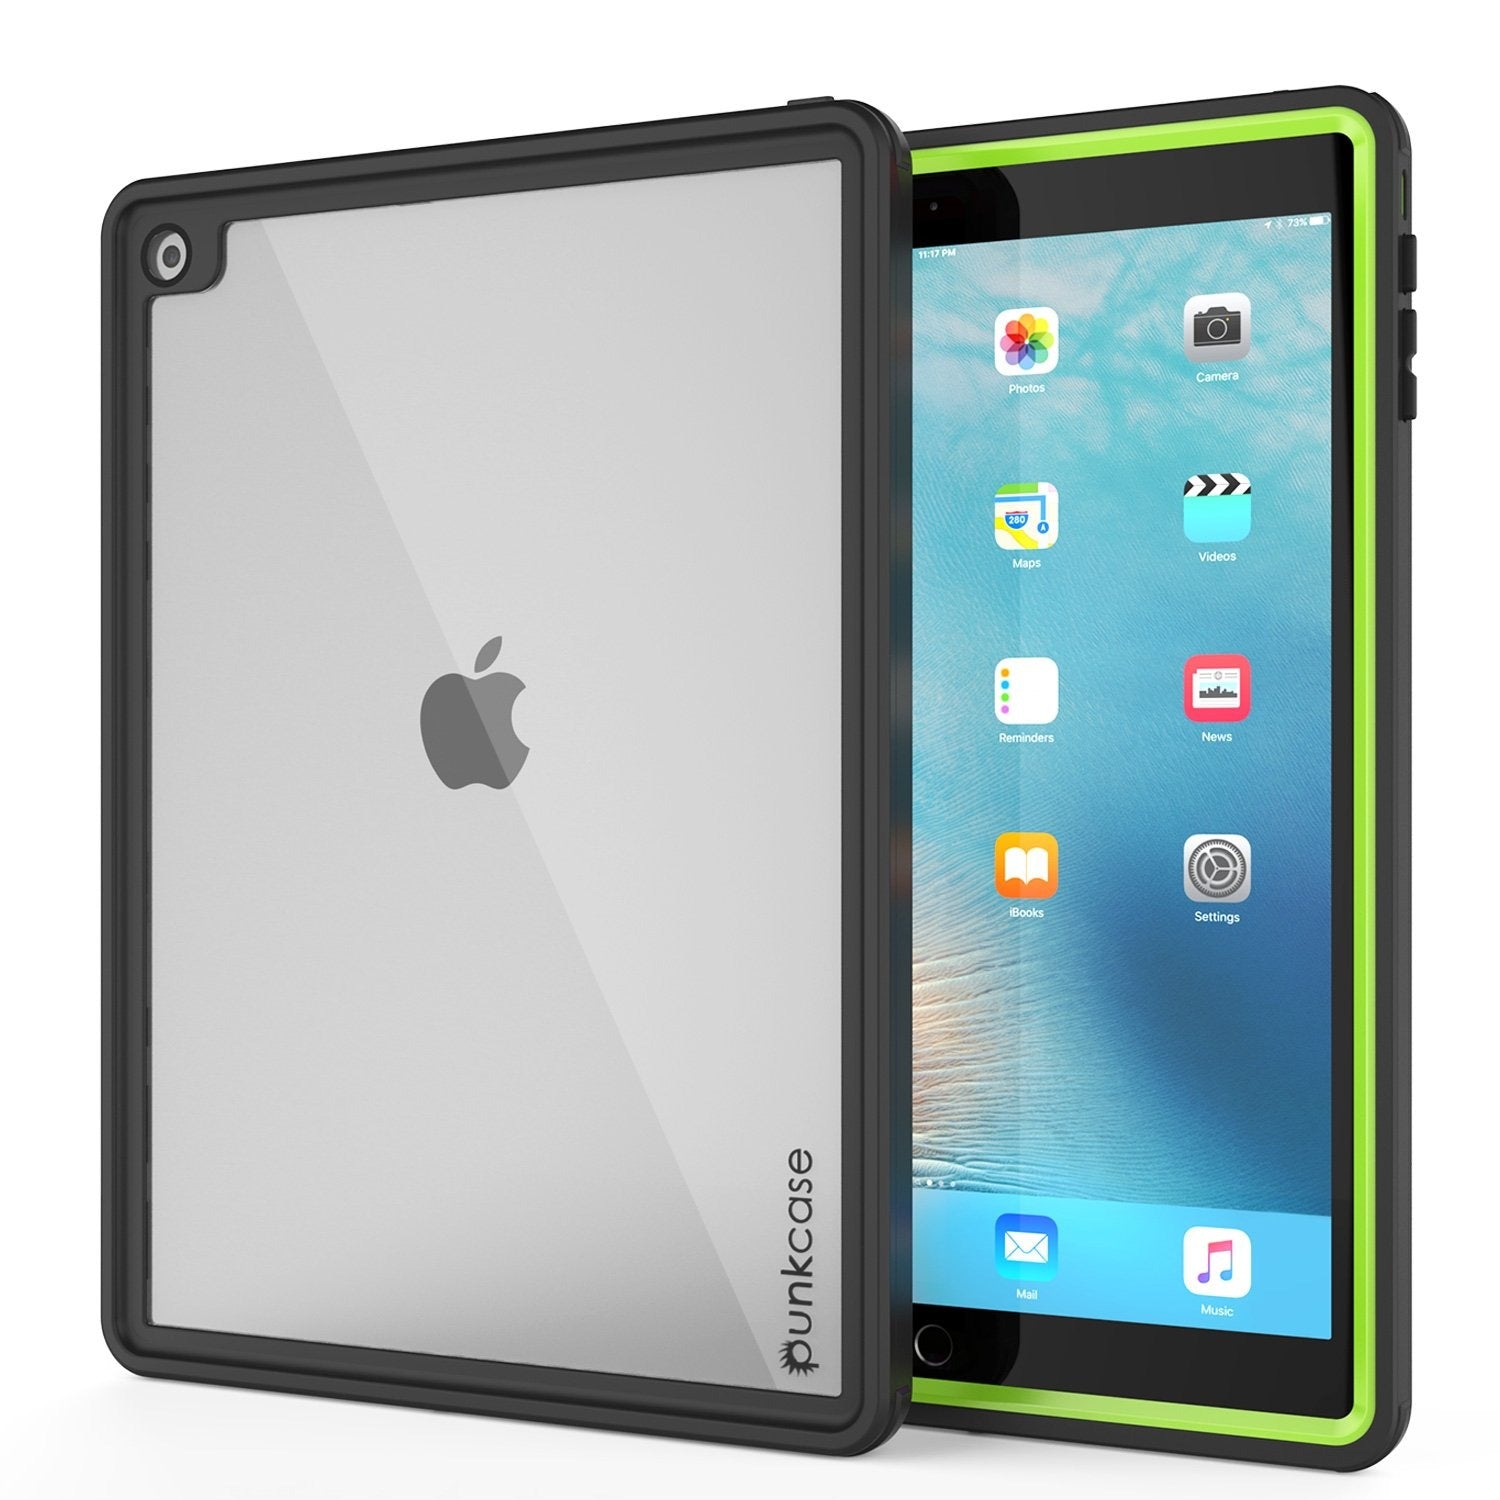 Punkcase iPad Pro 9.7 Case [CRYSTAL Series], Waterproof, Ultra-Thin Cover [Shockproof] [Dustproof] with Built-in Screen Protector [Light Green] (Color in image: Light Green)